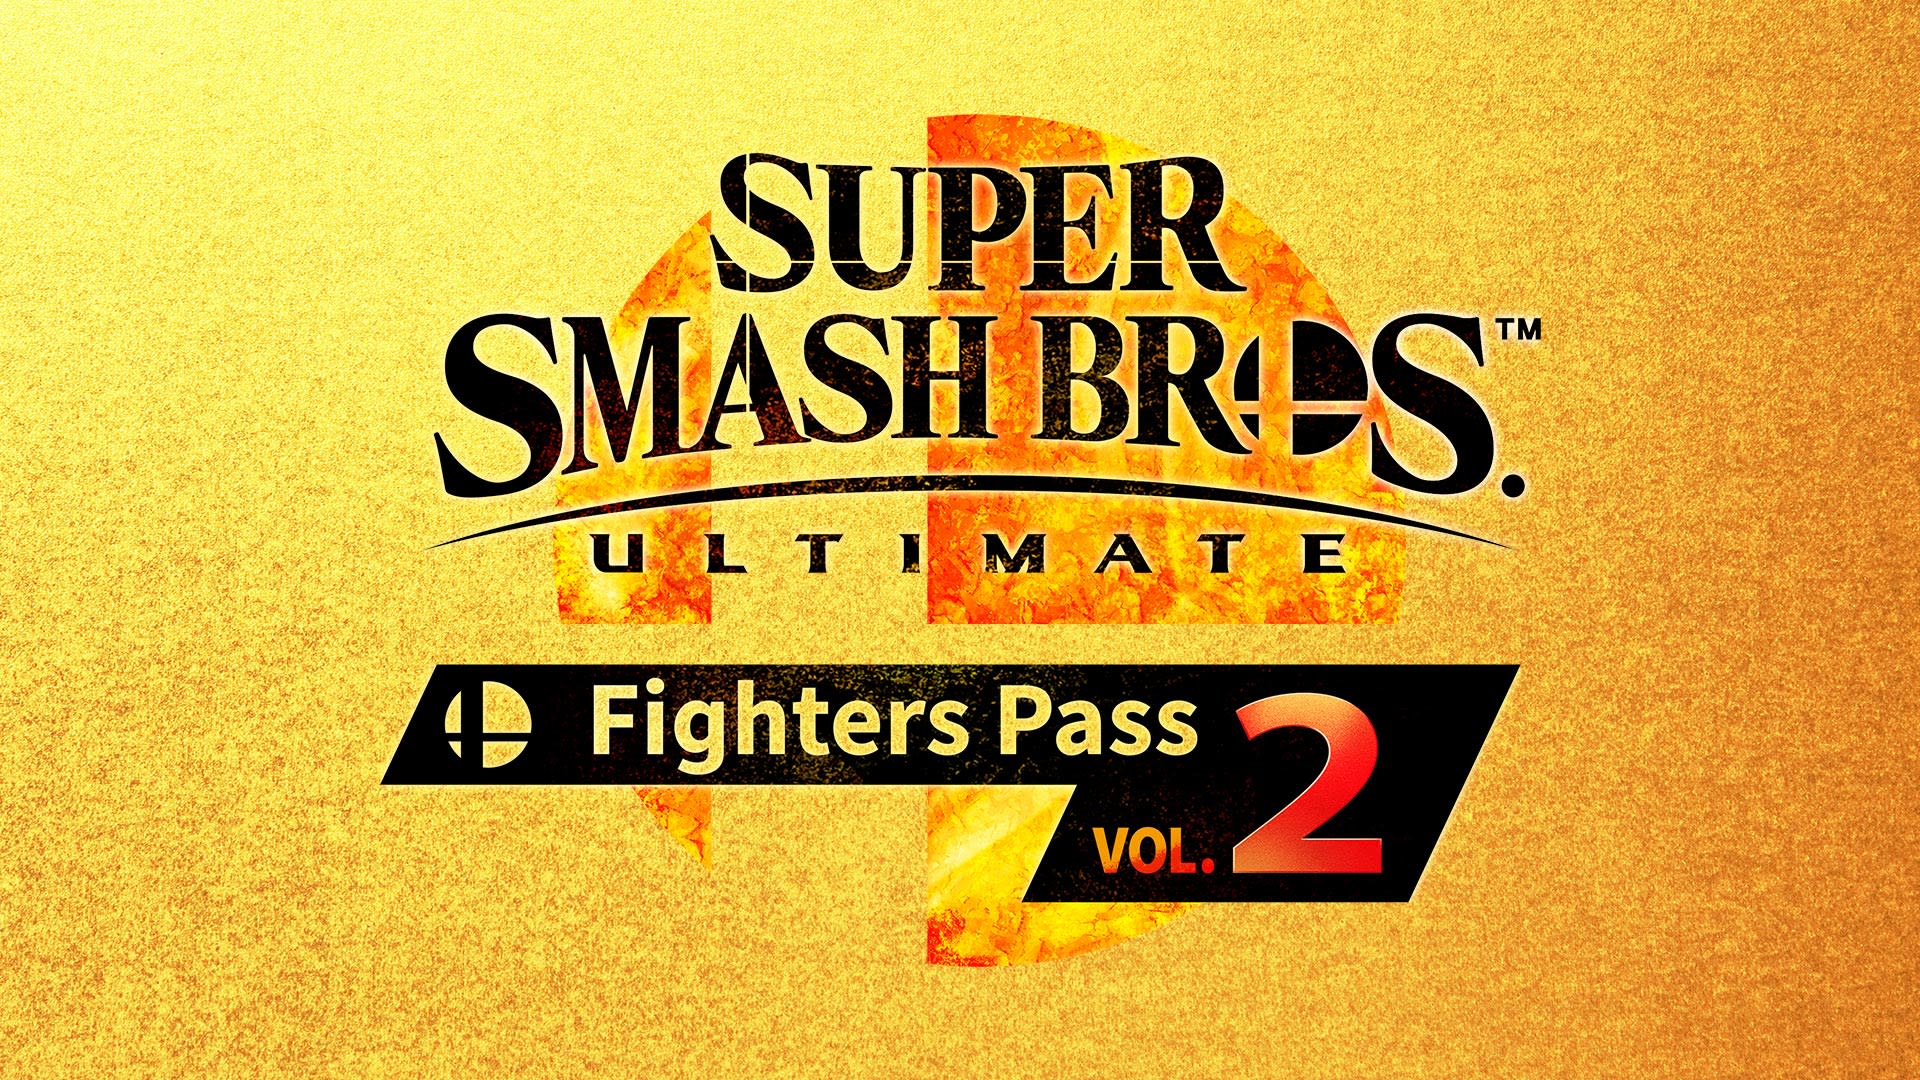 Super Smash Bros.™ Ultimate: Fighters Pass Vol. 2 